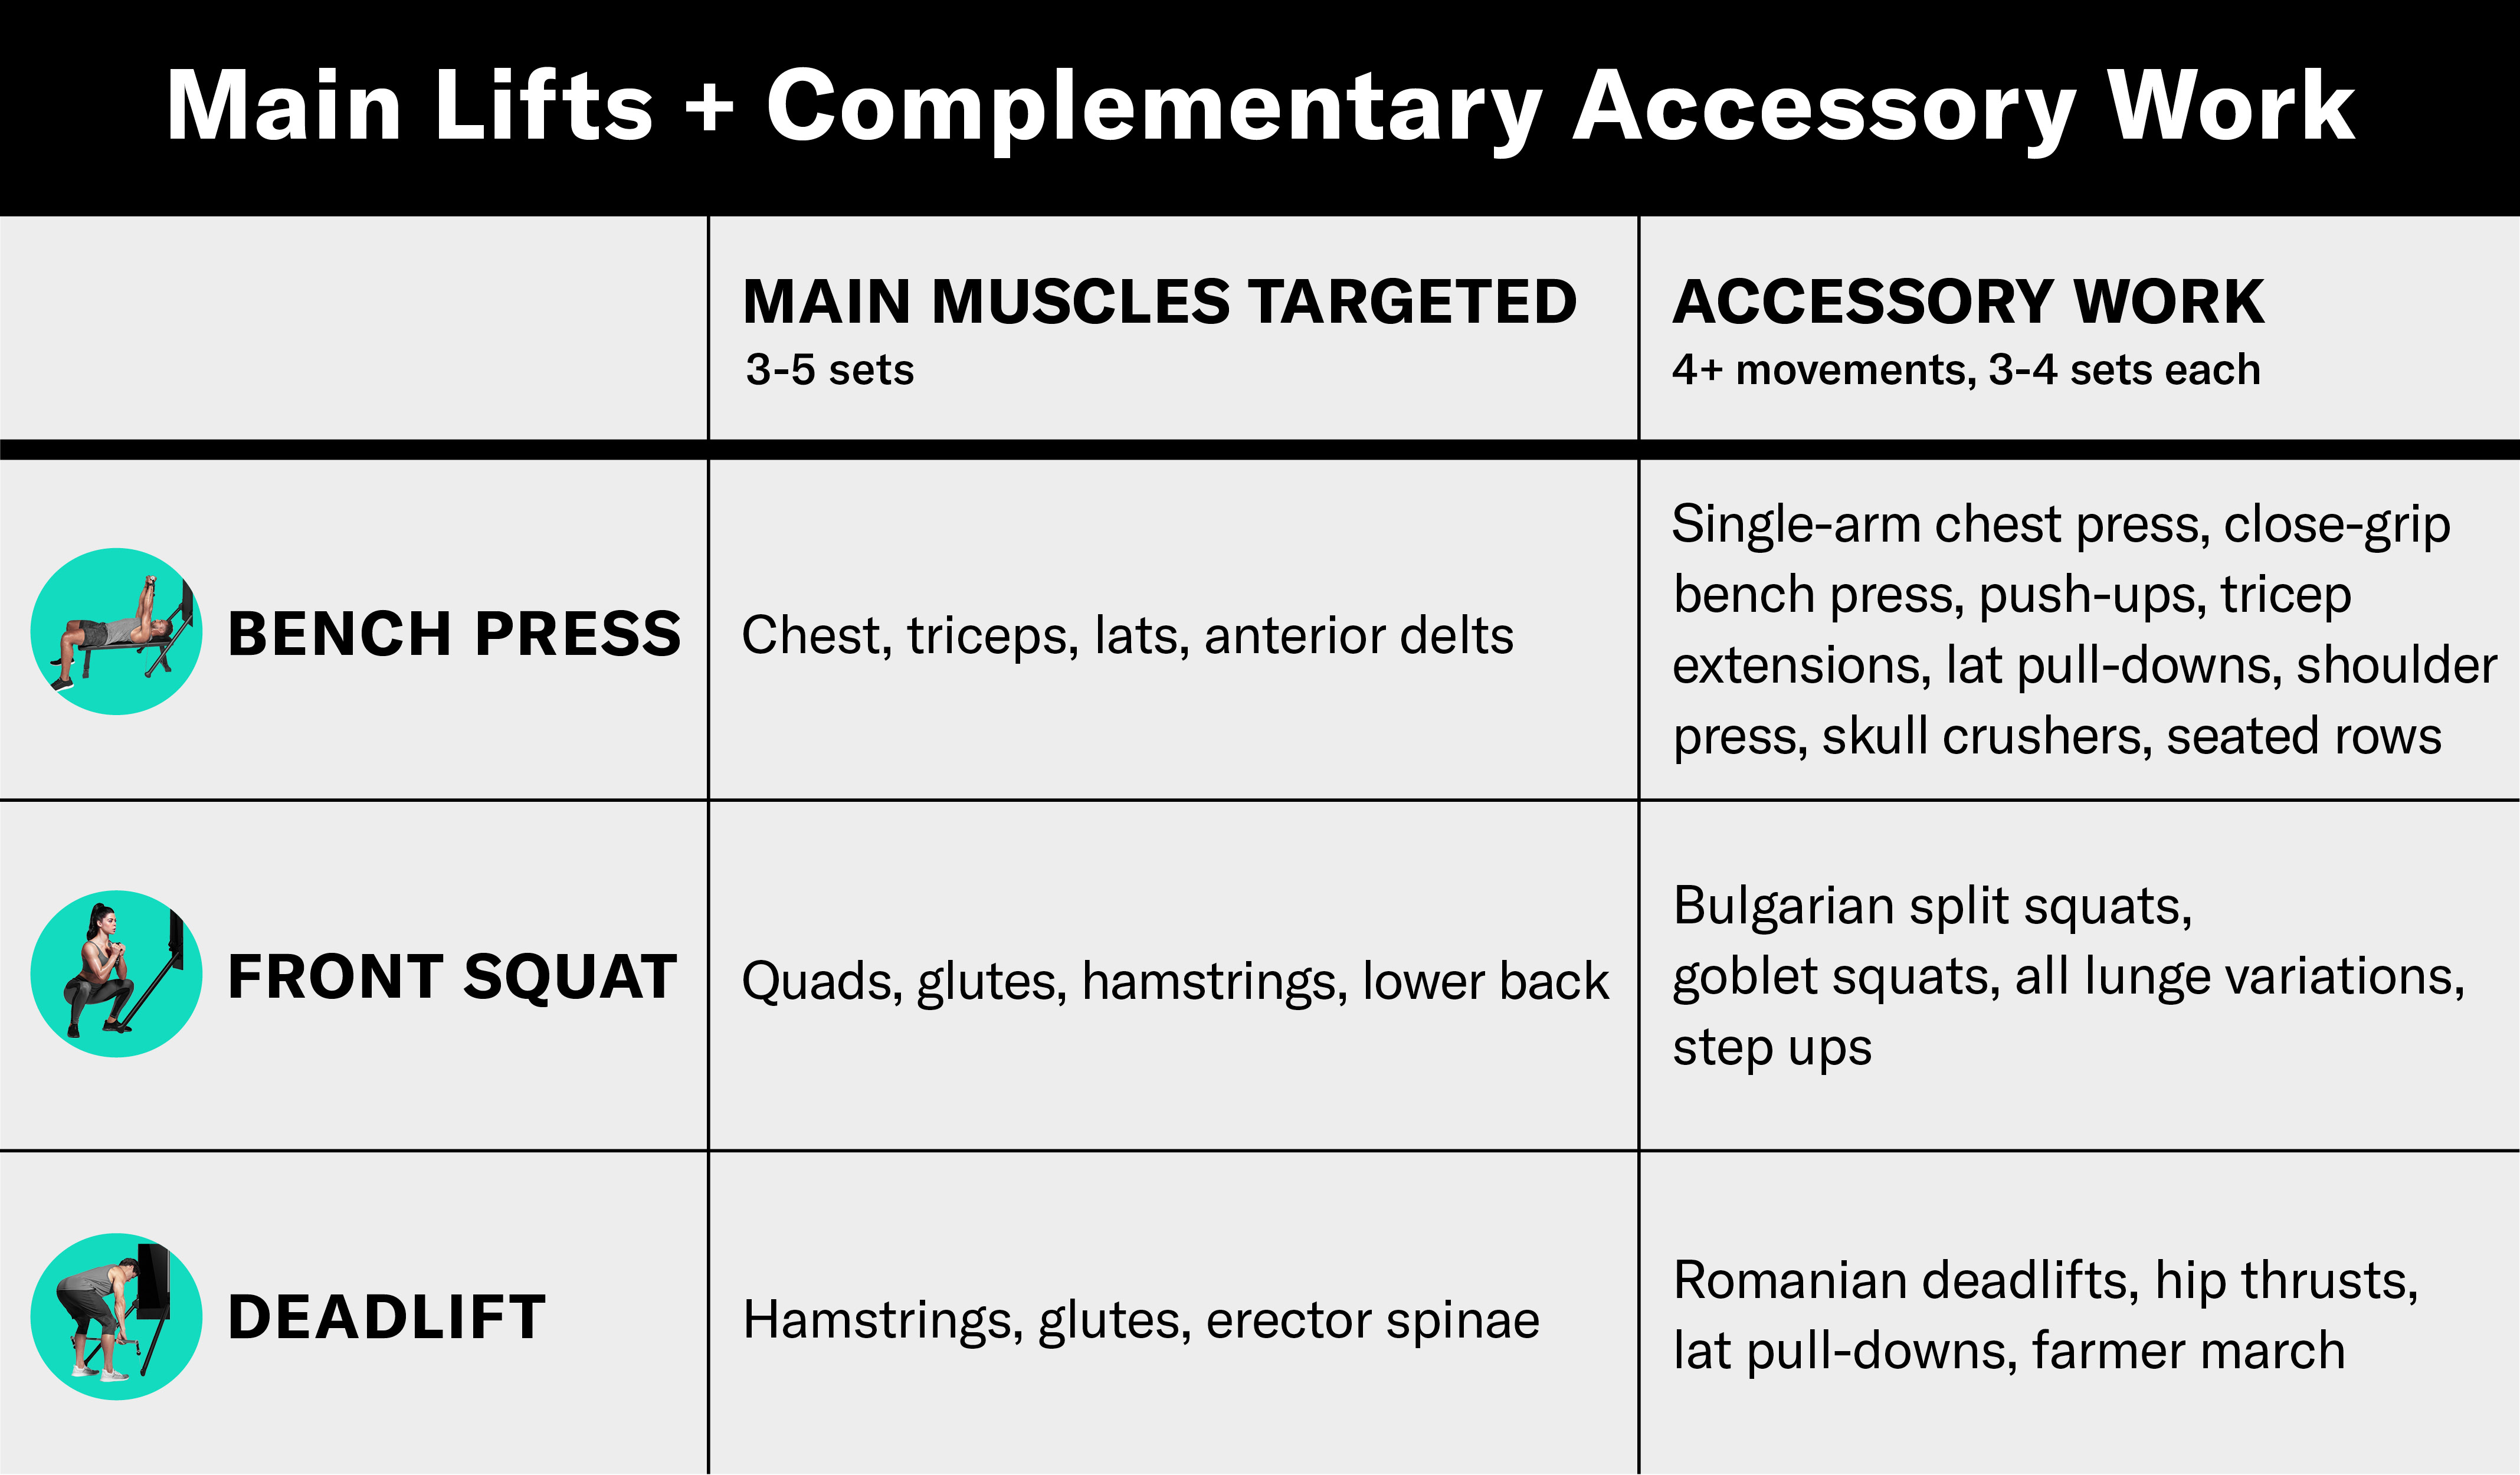 What Is Accessory Work and What Are the Benefits?